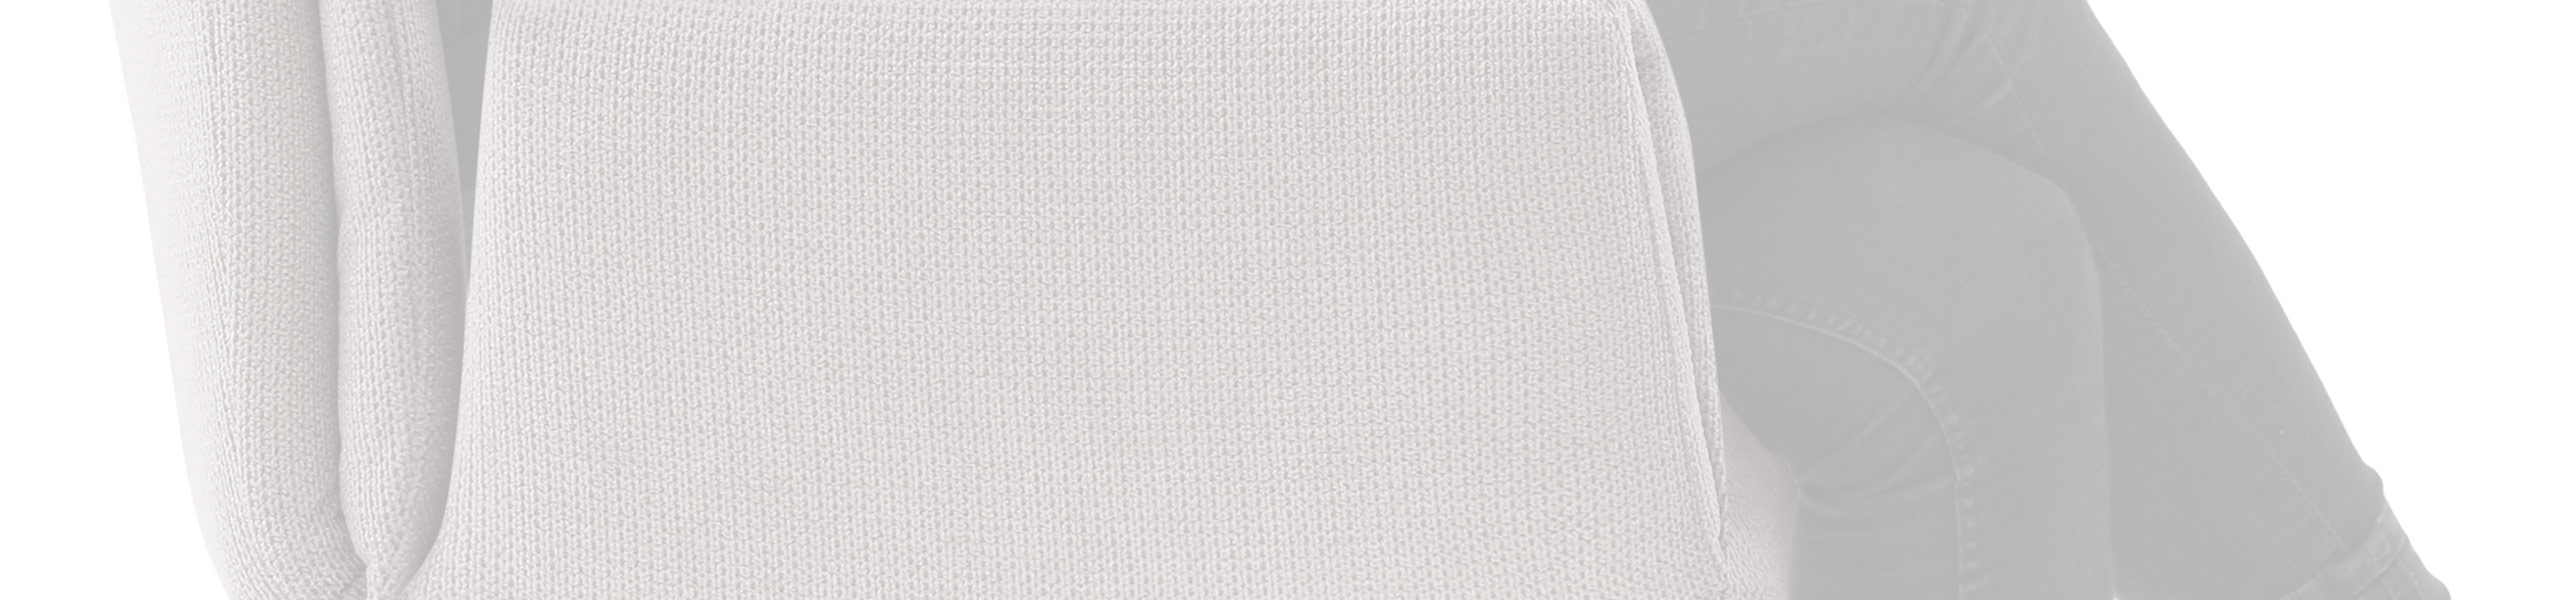 Neve Arm Chair Tweed Fabric Review Banner